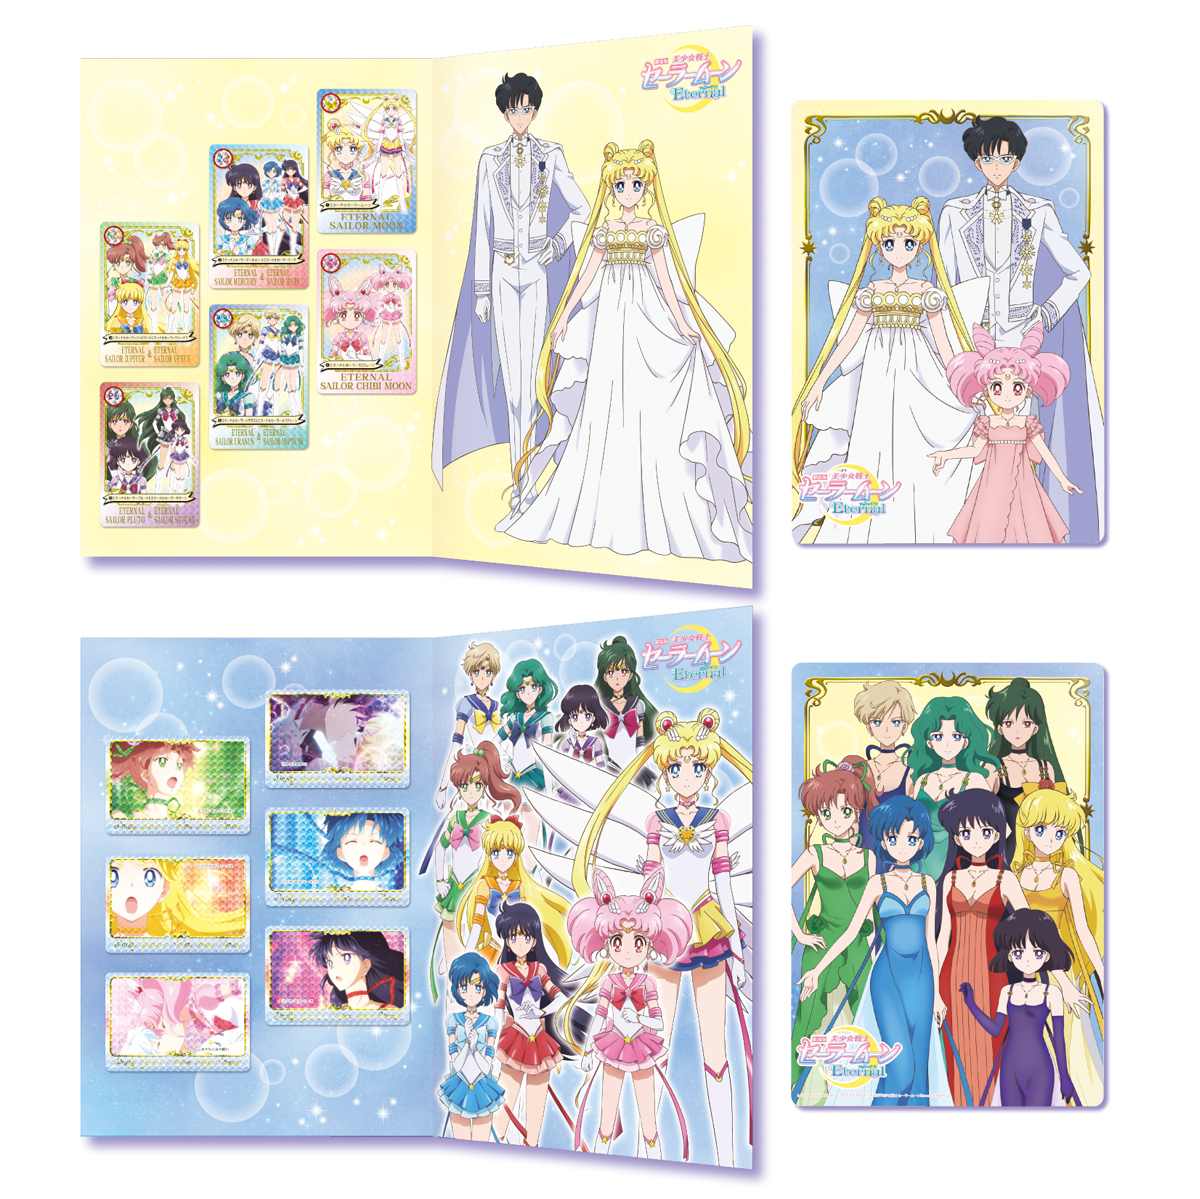 PRETTY GUARDIAN SAILOR MOON ETERNAL THE MOVIE PREMIUM CARDDASS COLLECTION 2 (2-TYPE SET)